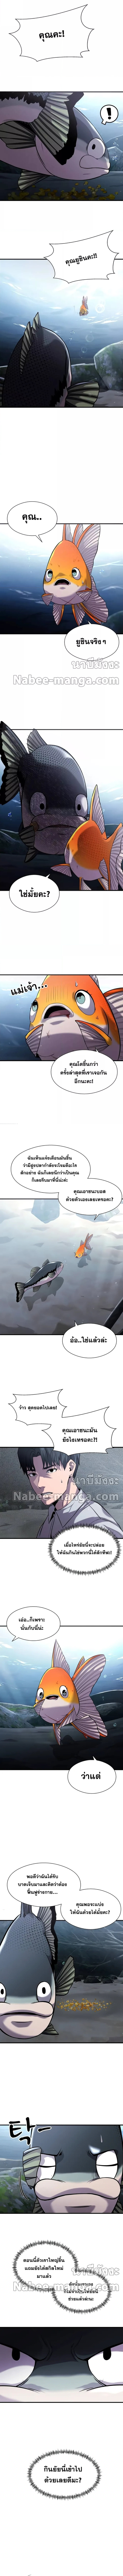 Surviving As a Fish 19 (8)